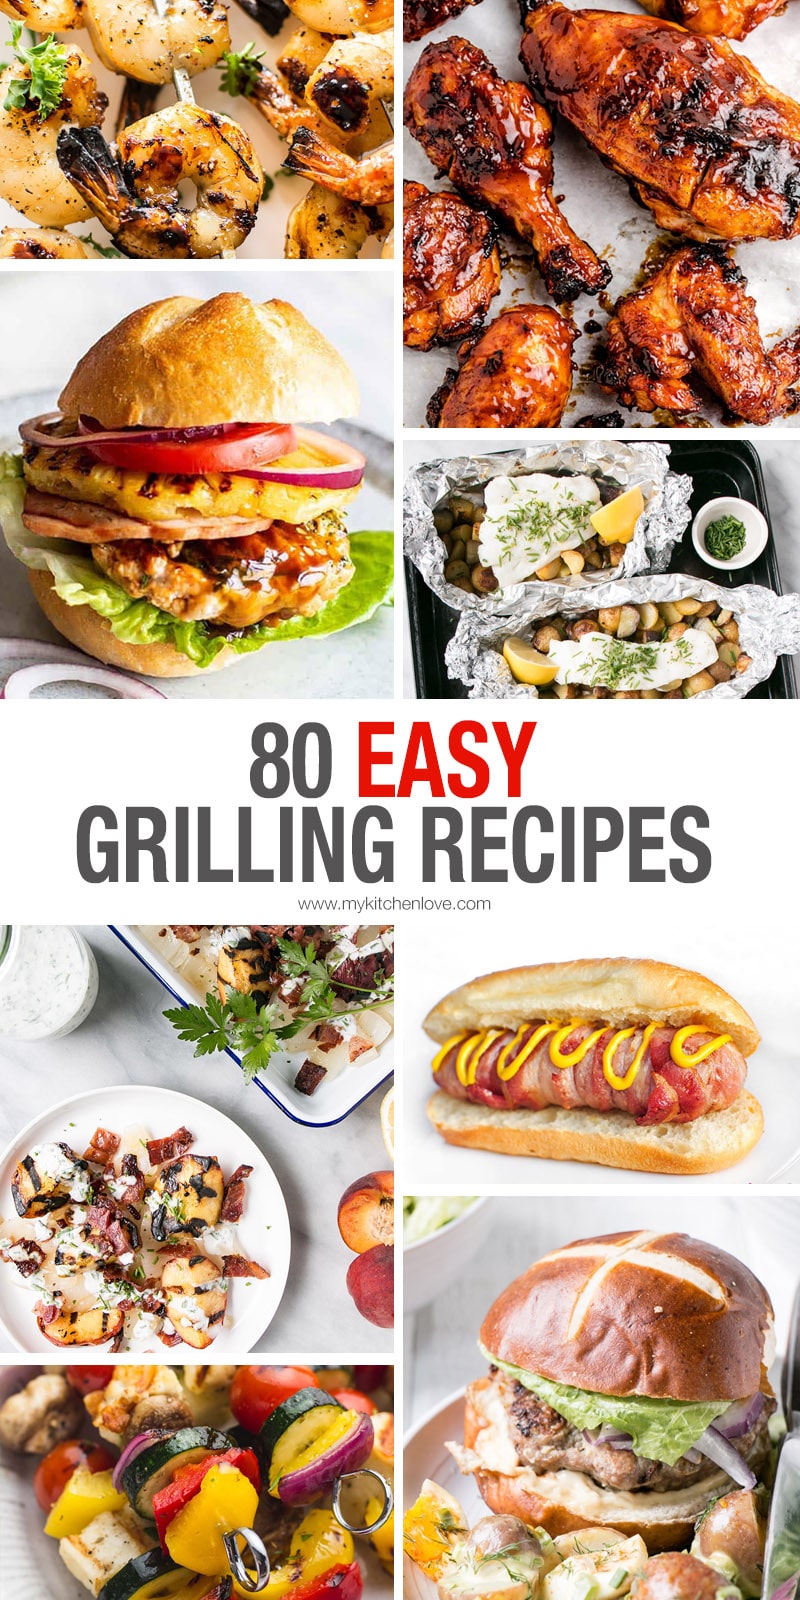 Summer is calling us all outside and that means taking the kitchen outside too. These 80 easy grilling recipes are going to make your life so much simpler this summer. Dinner is right here! via @mykitchenlove